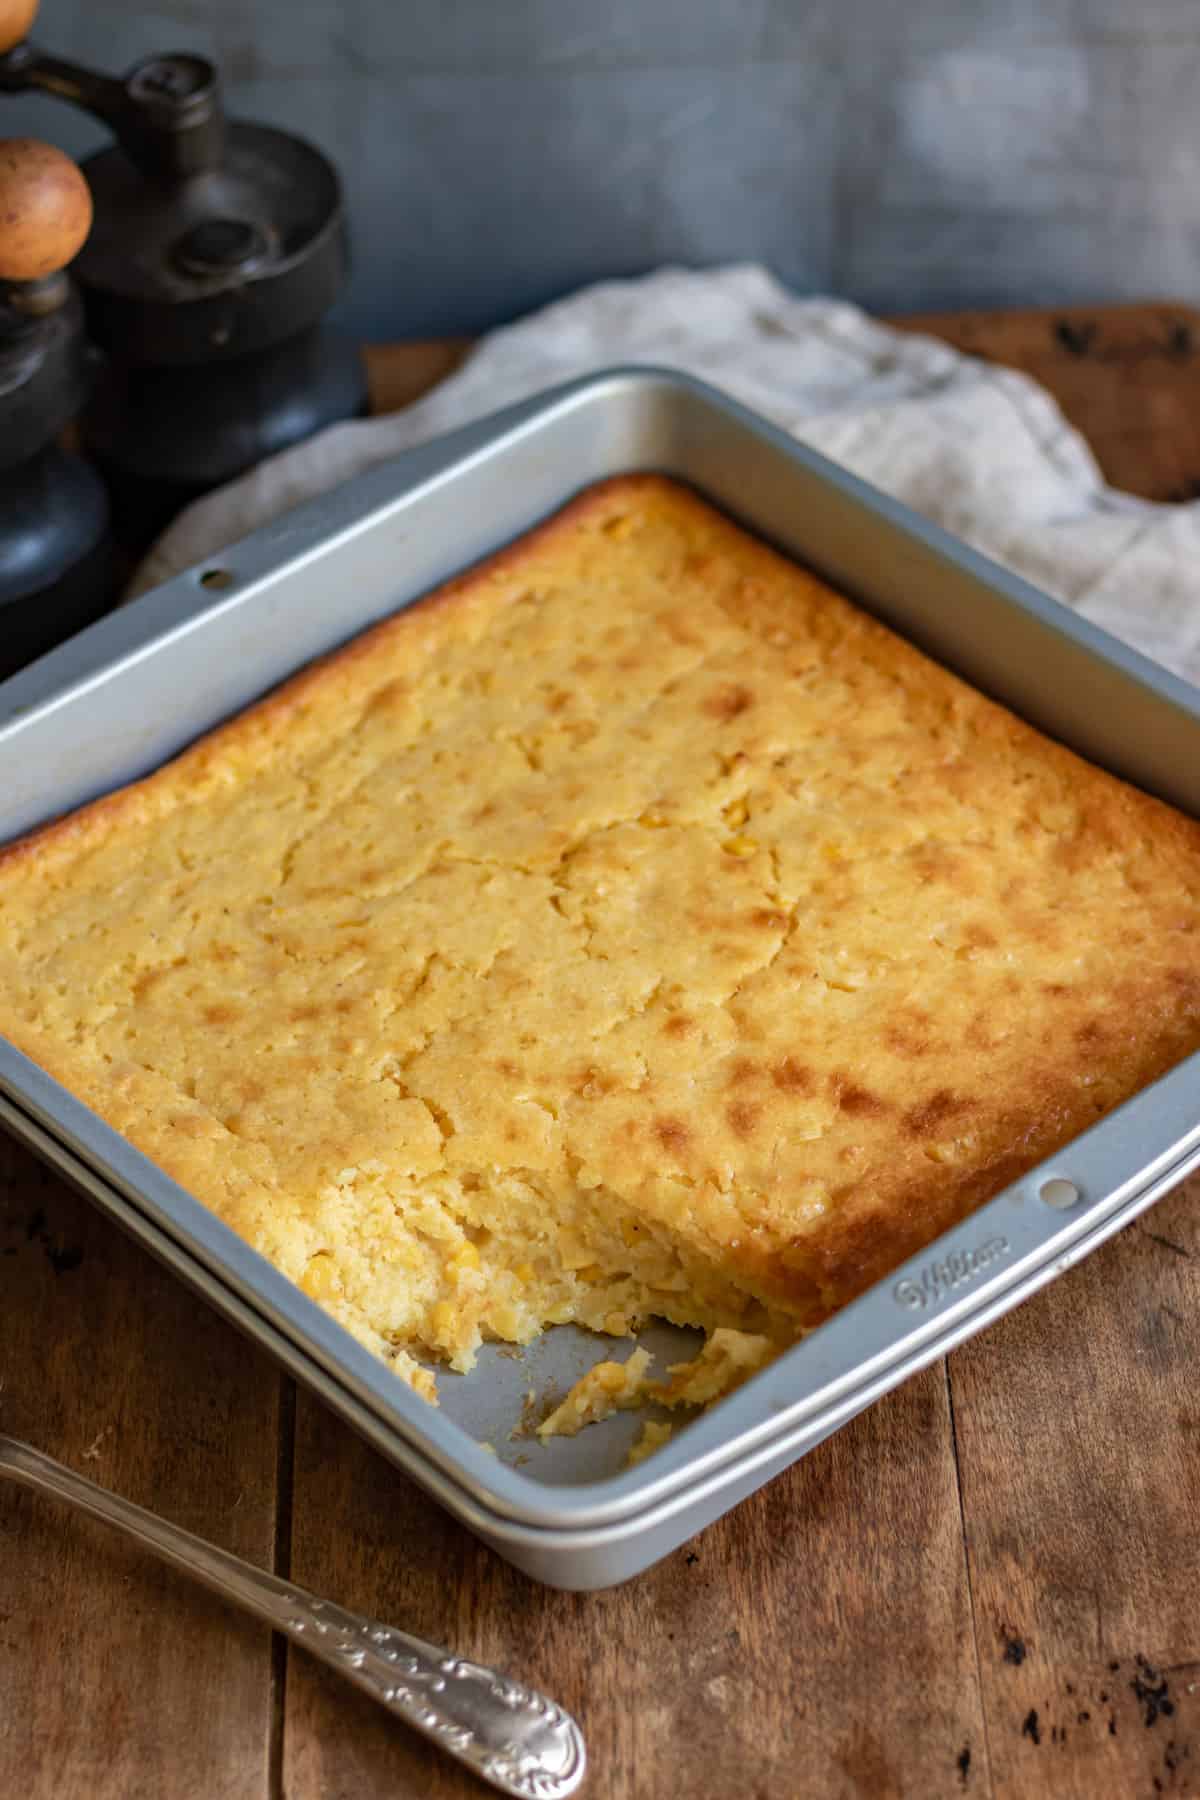 Pan of Jiffy corn casserole with a portion removed, on a wooden table.